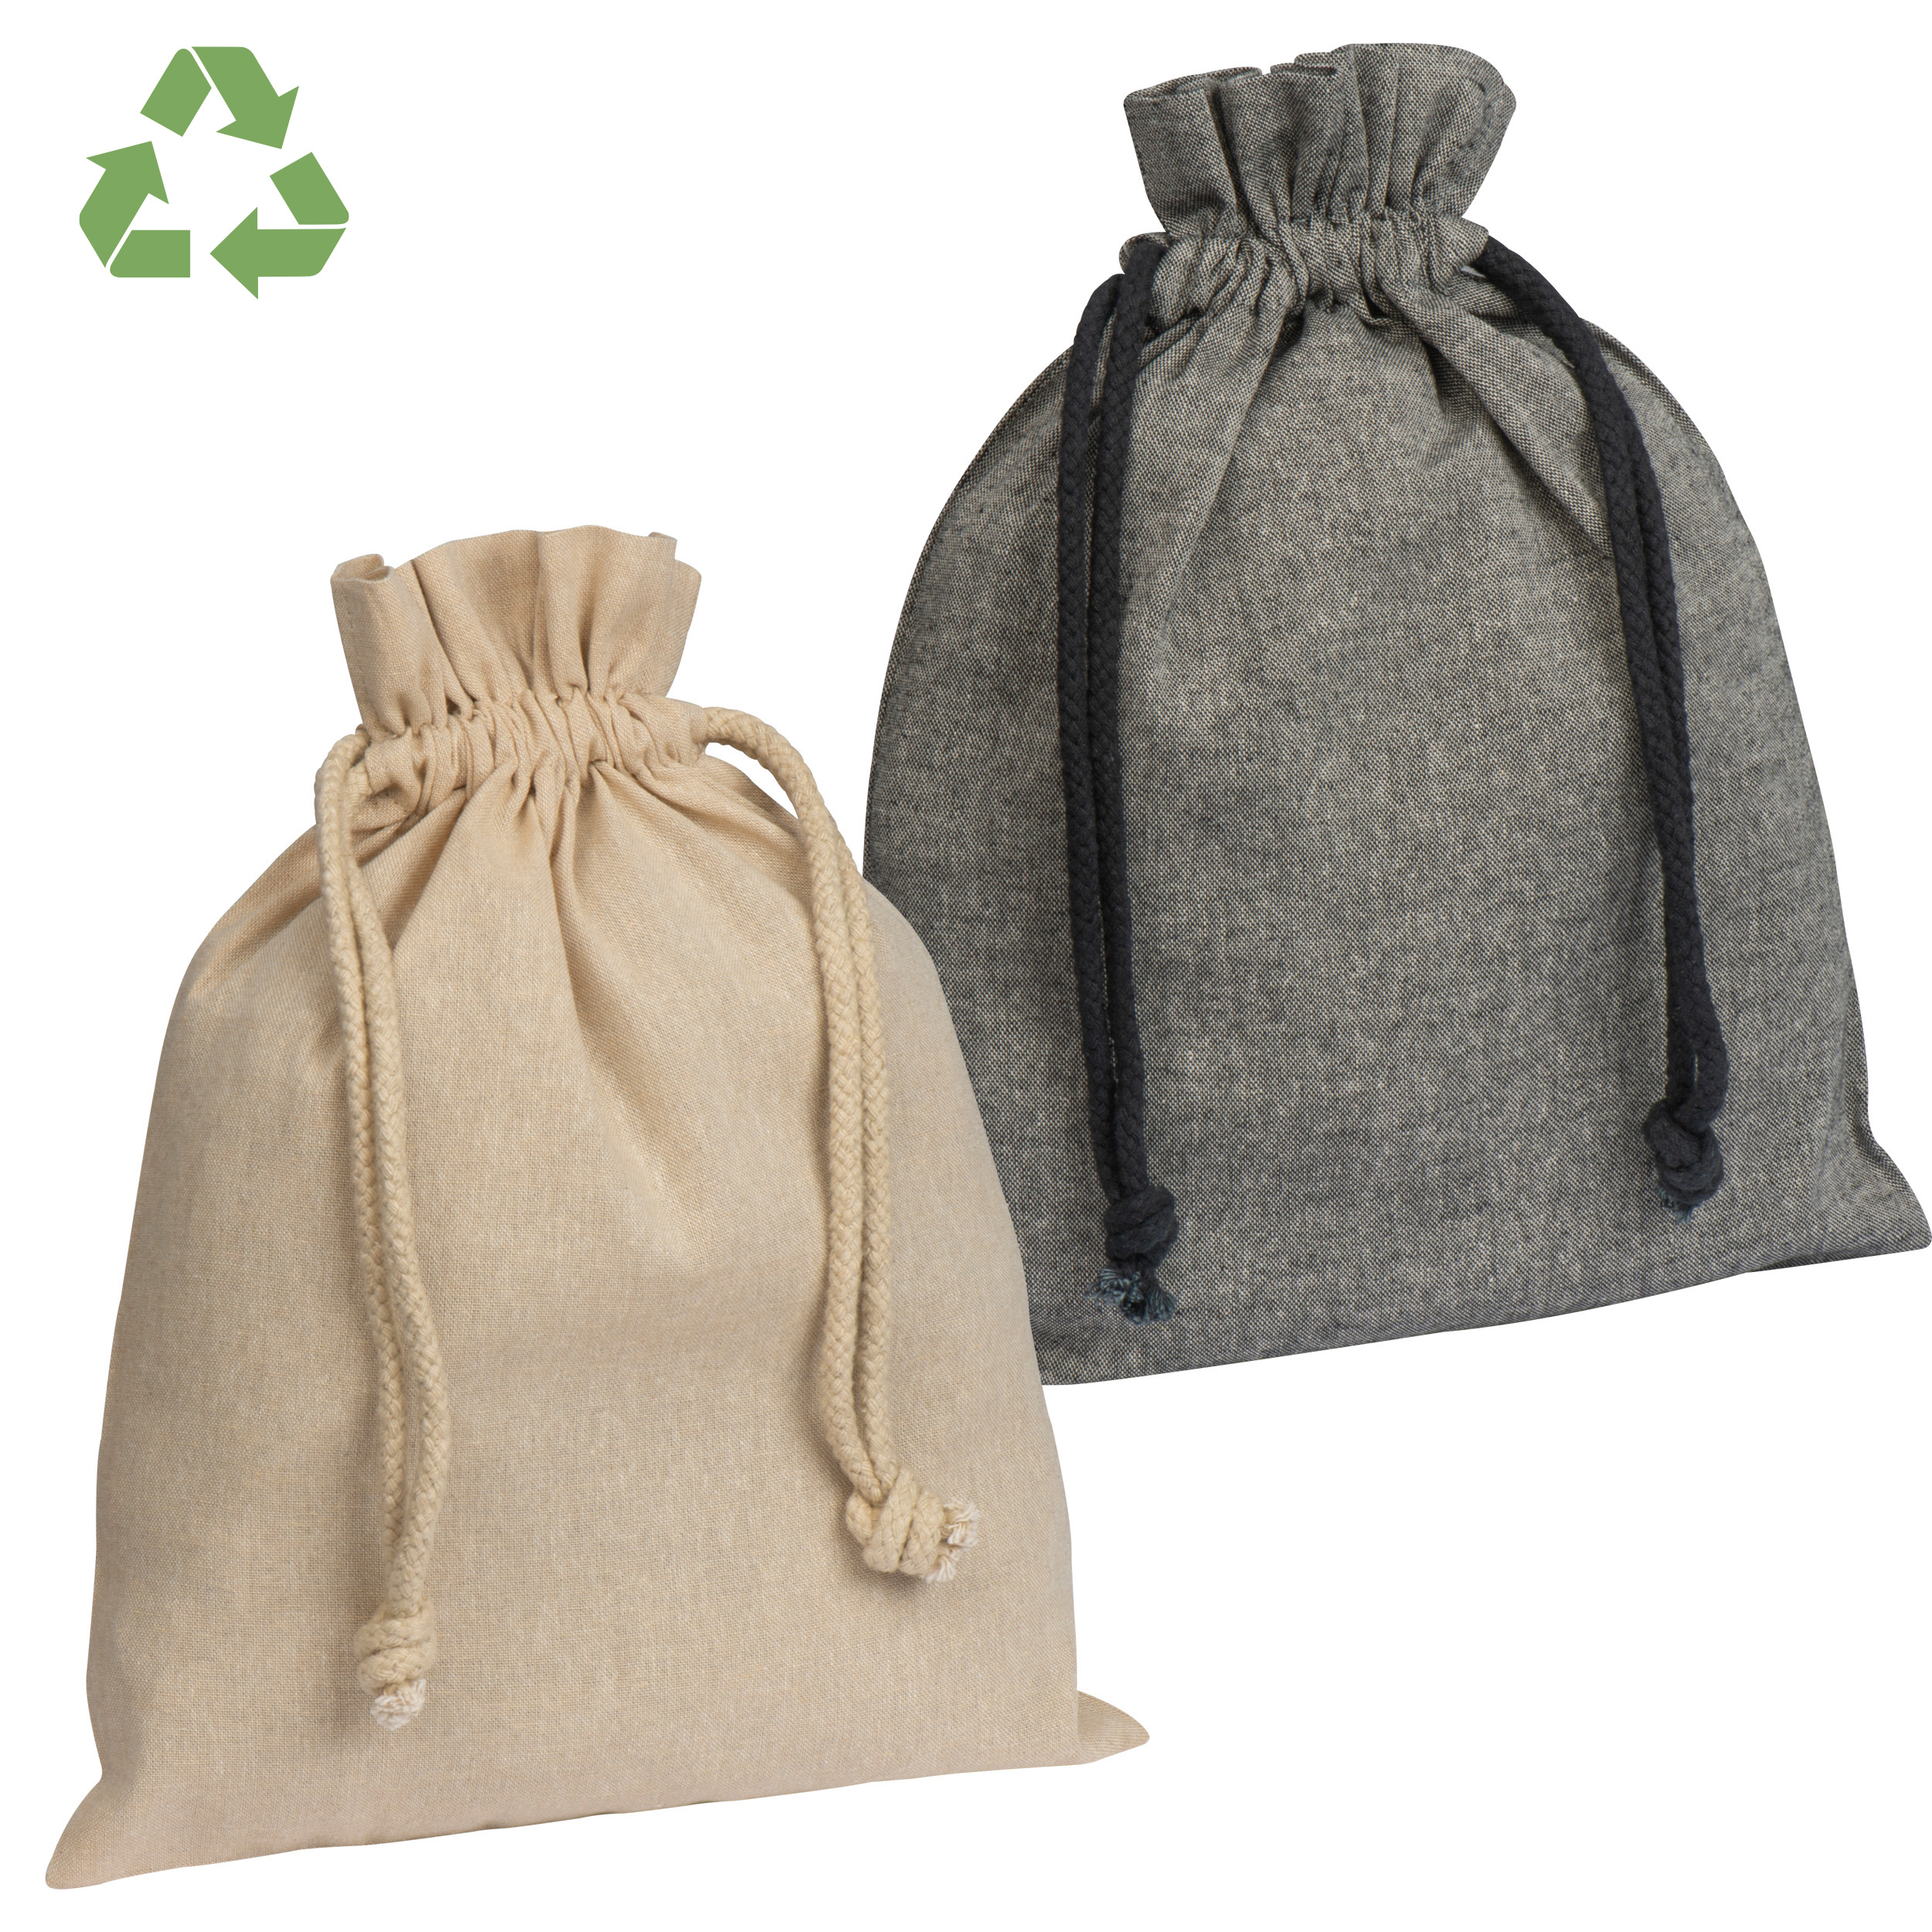 Medium drawstring bag made from recycled cotton